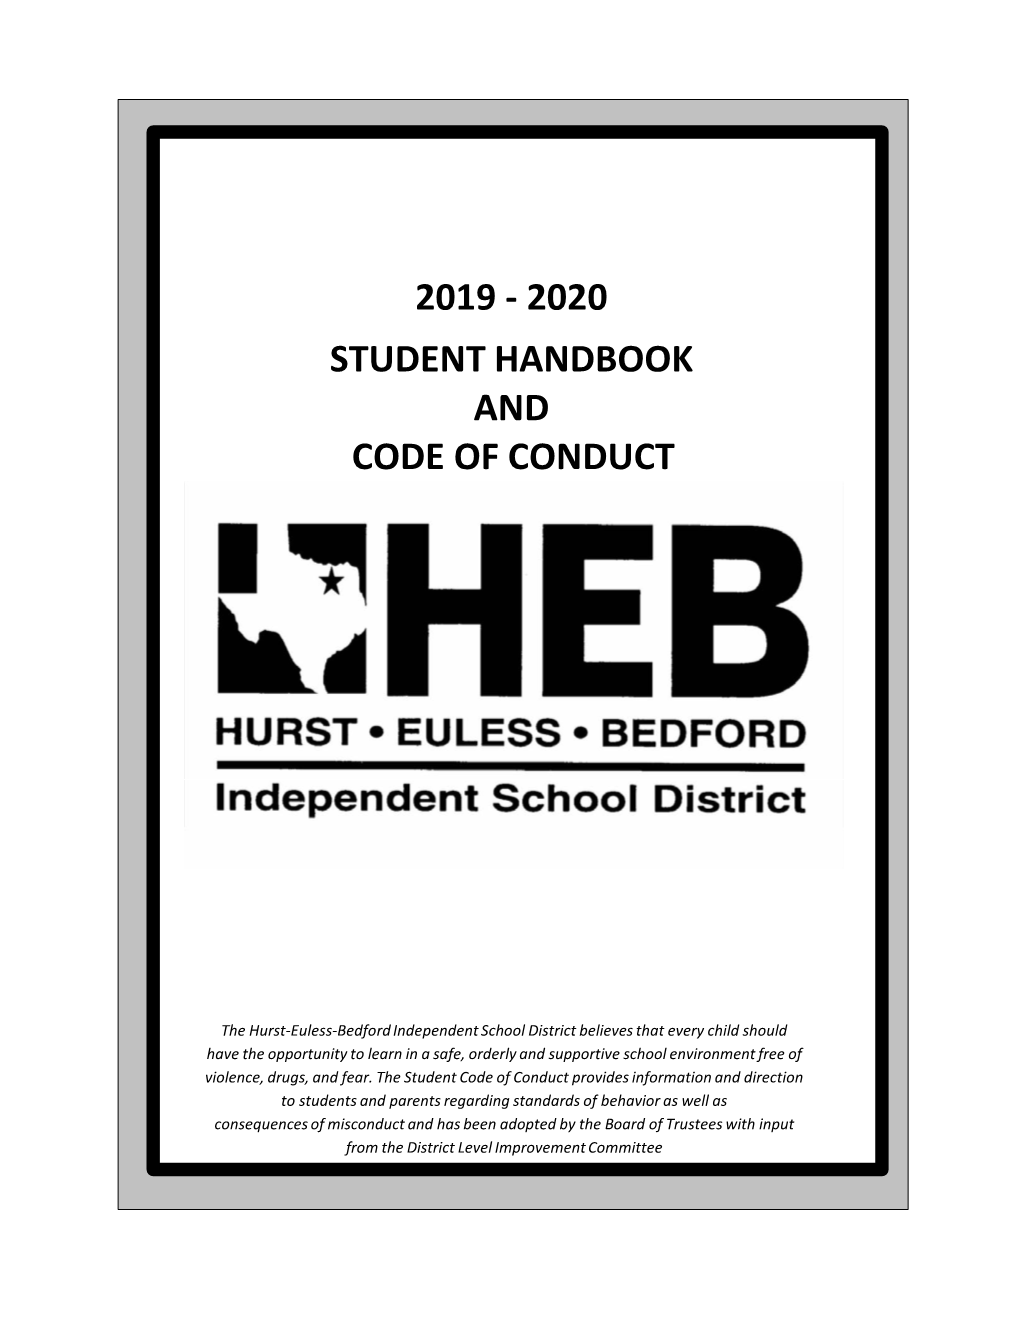 2019 - 2020 Student Handbook and Code of Conduct